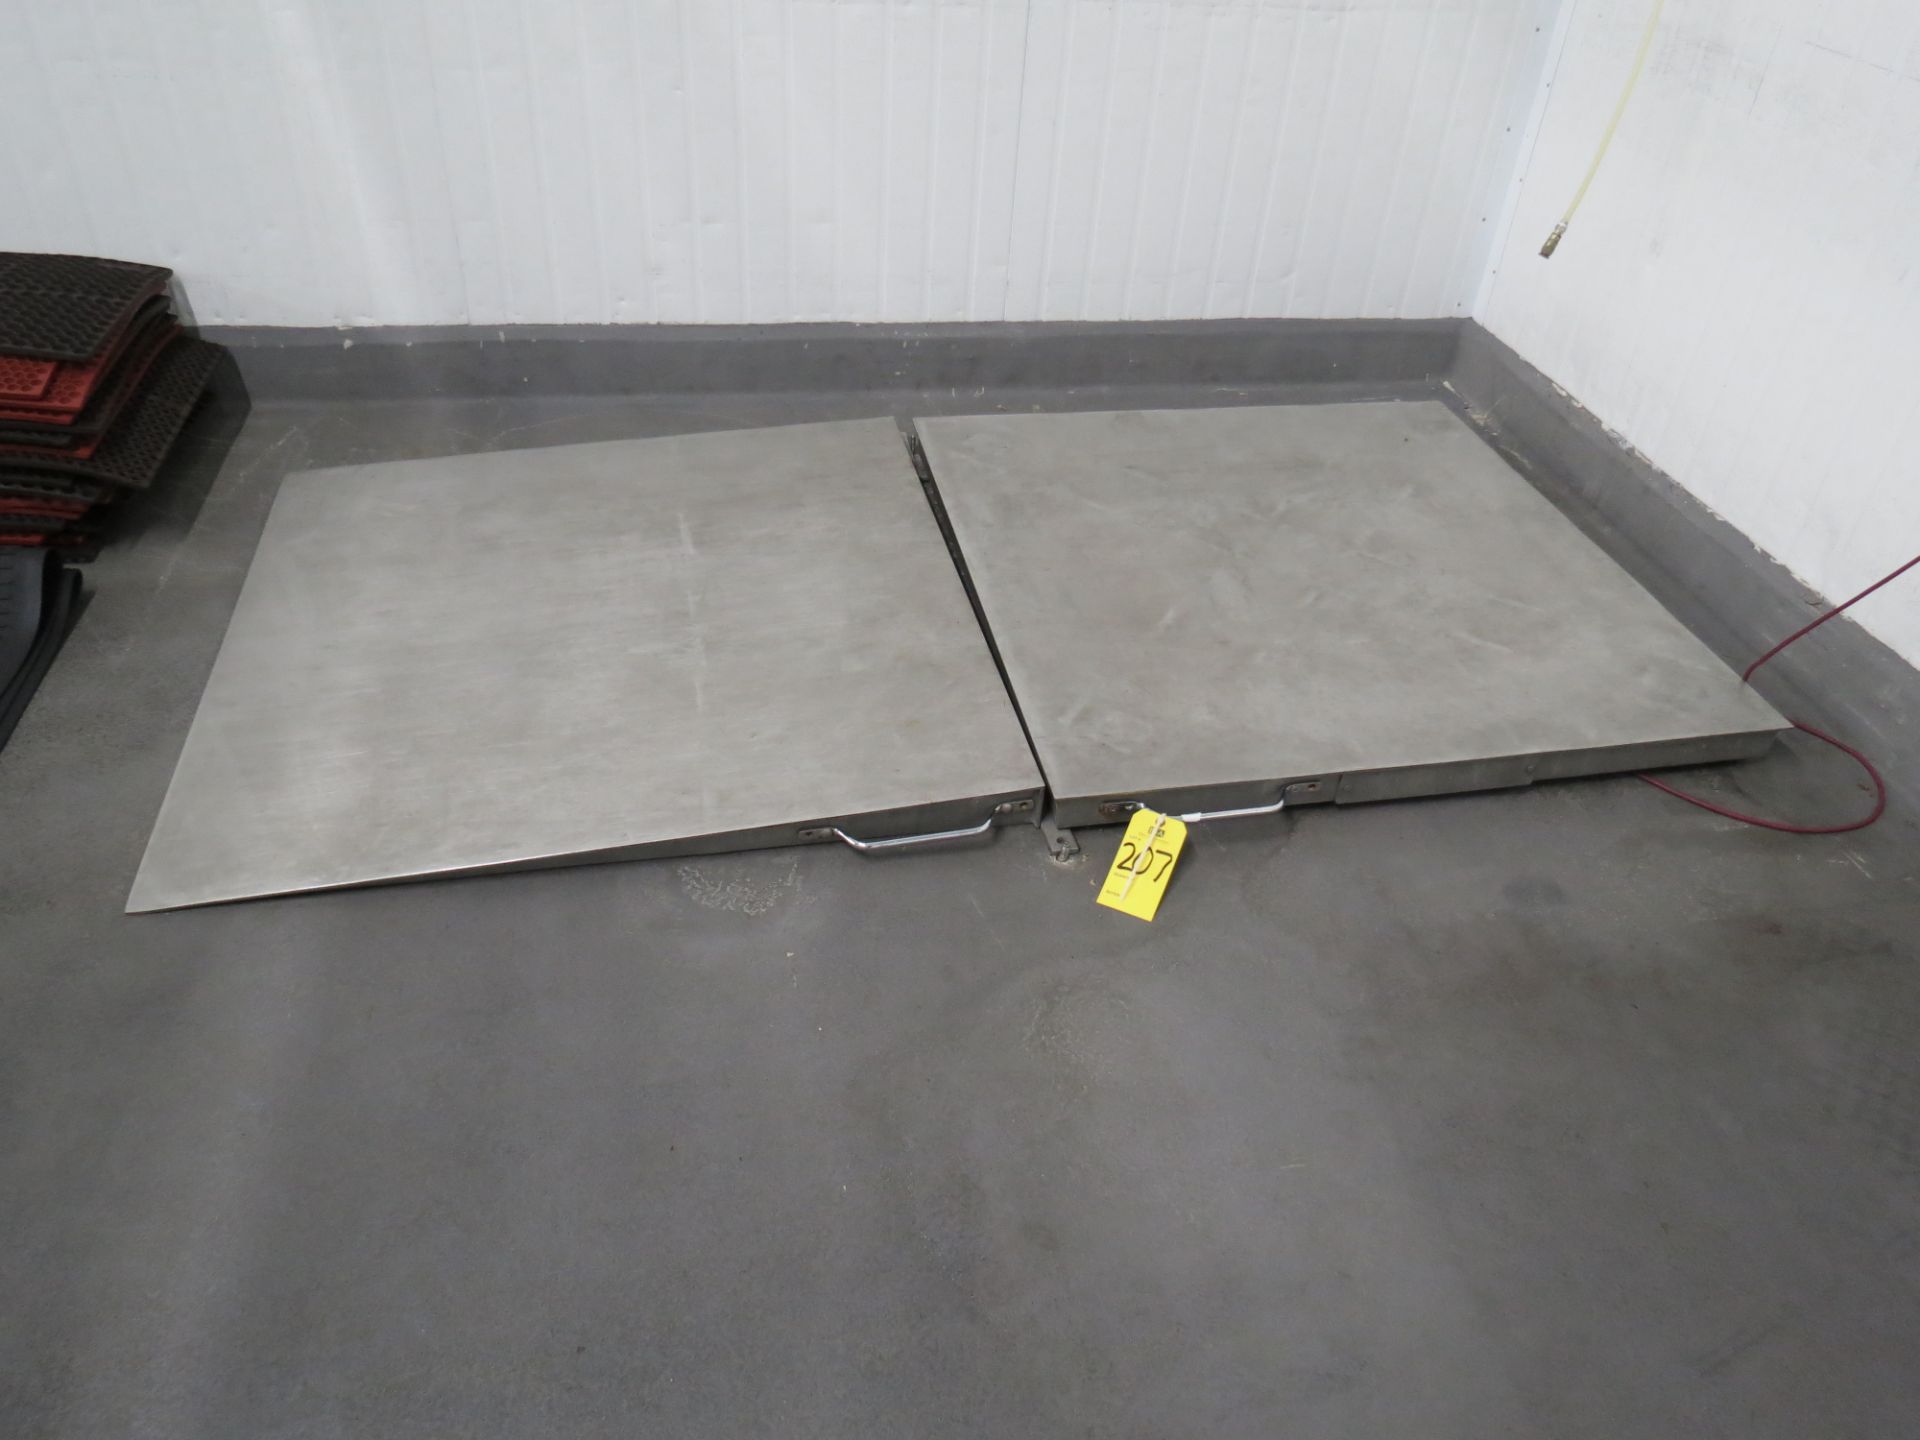 Defender 3000 XtremeW 4ft x 4ft Smooth Aluminum Platform Scale with Ramp - Image 2 of 3